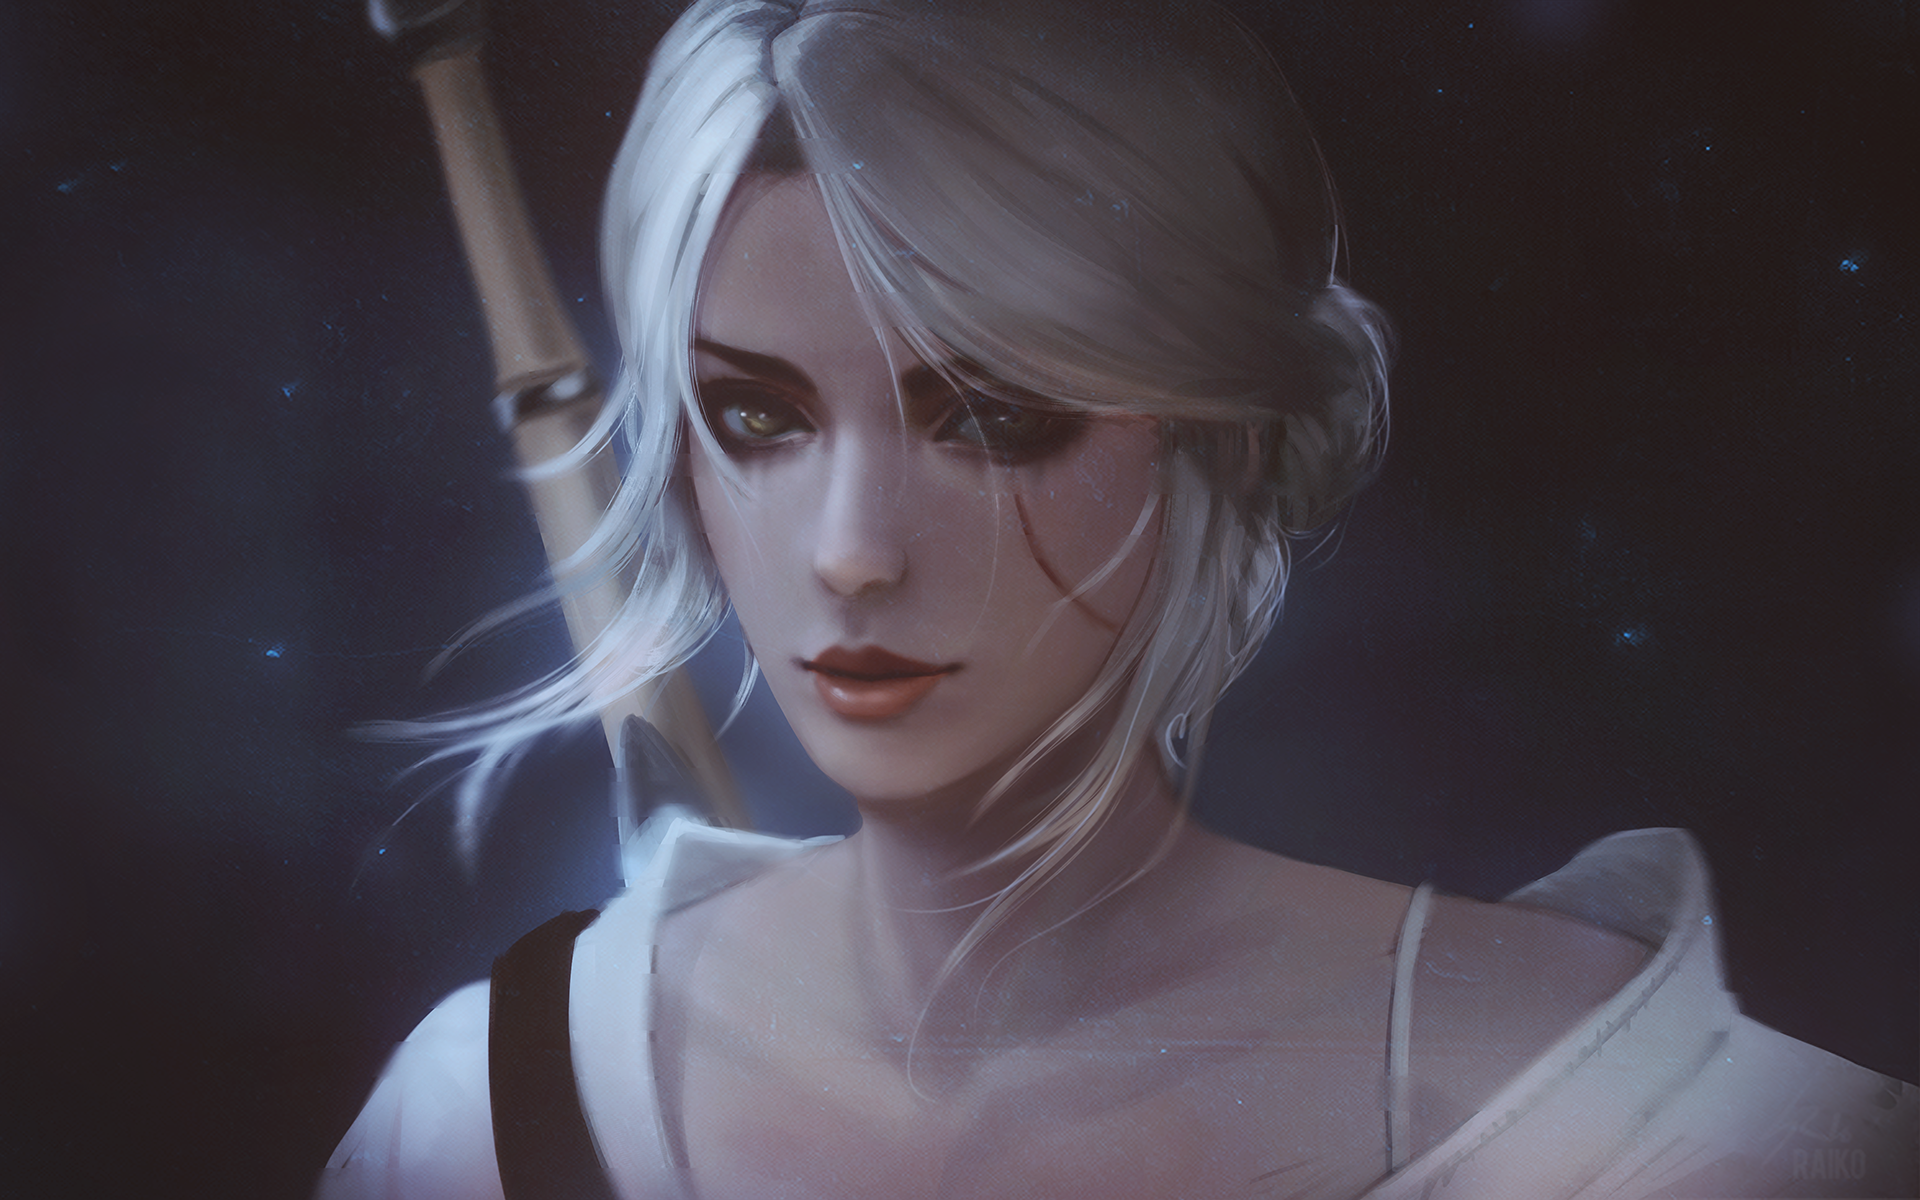 Anime 1920x1200 fan art portrait The Witcher 3: Wild Hunt white hair Cirilla Fiona Elen Riannon The Witcher video games PC gaming video game girls video game characters women fantasy art face looking at viewer fantasy girl